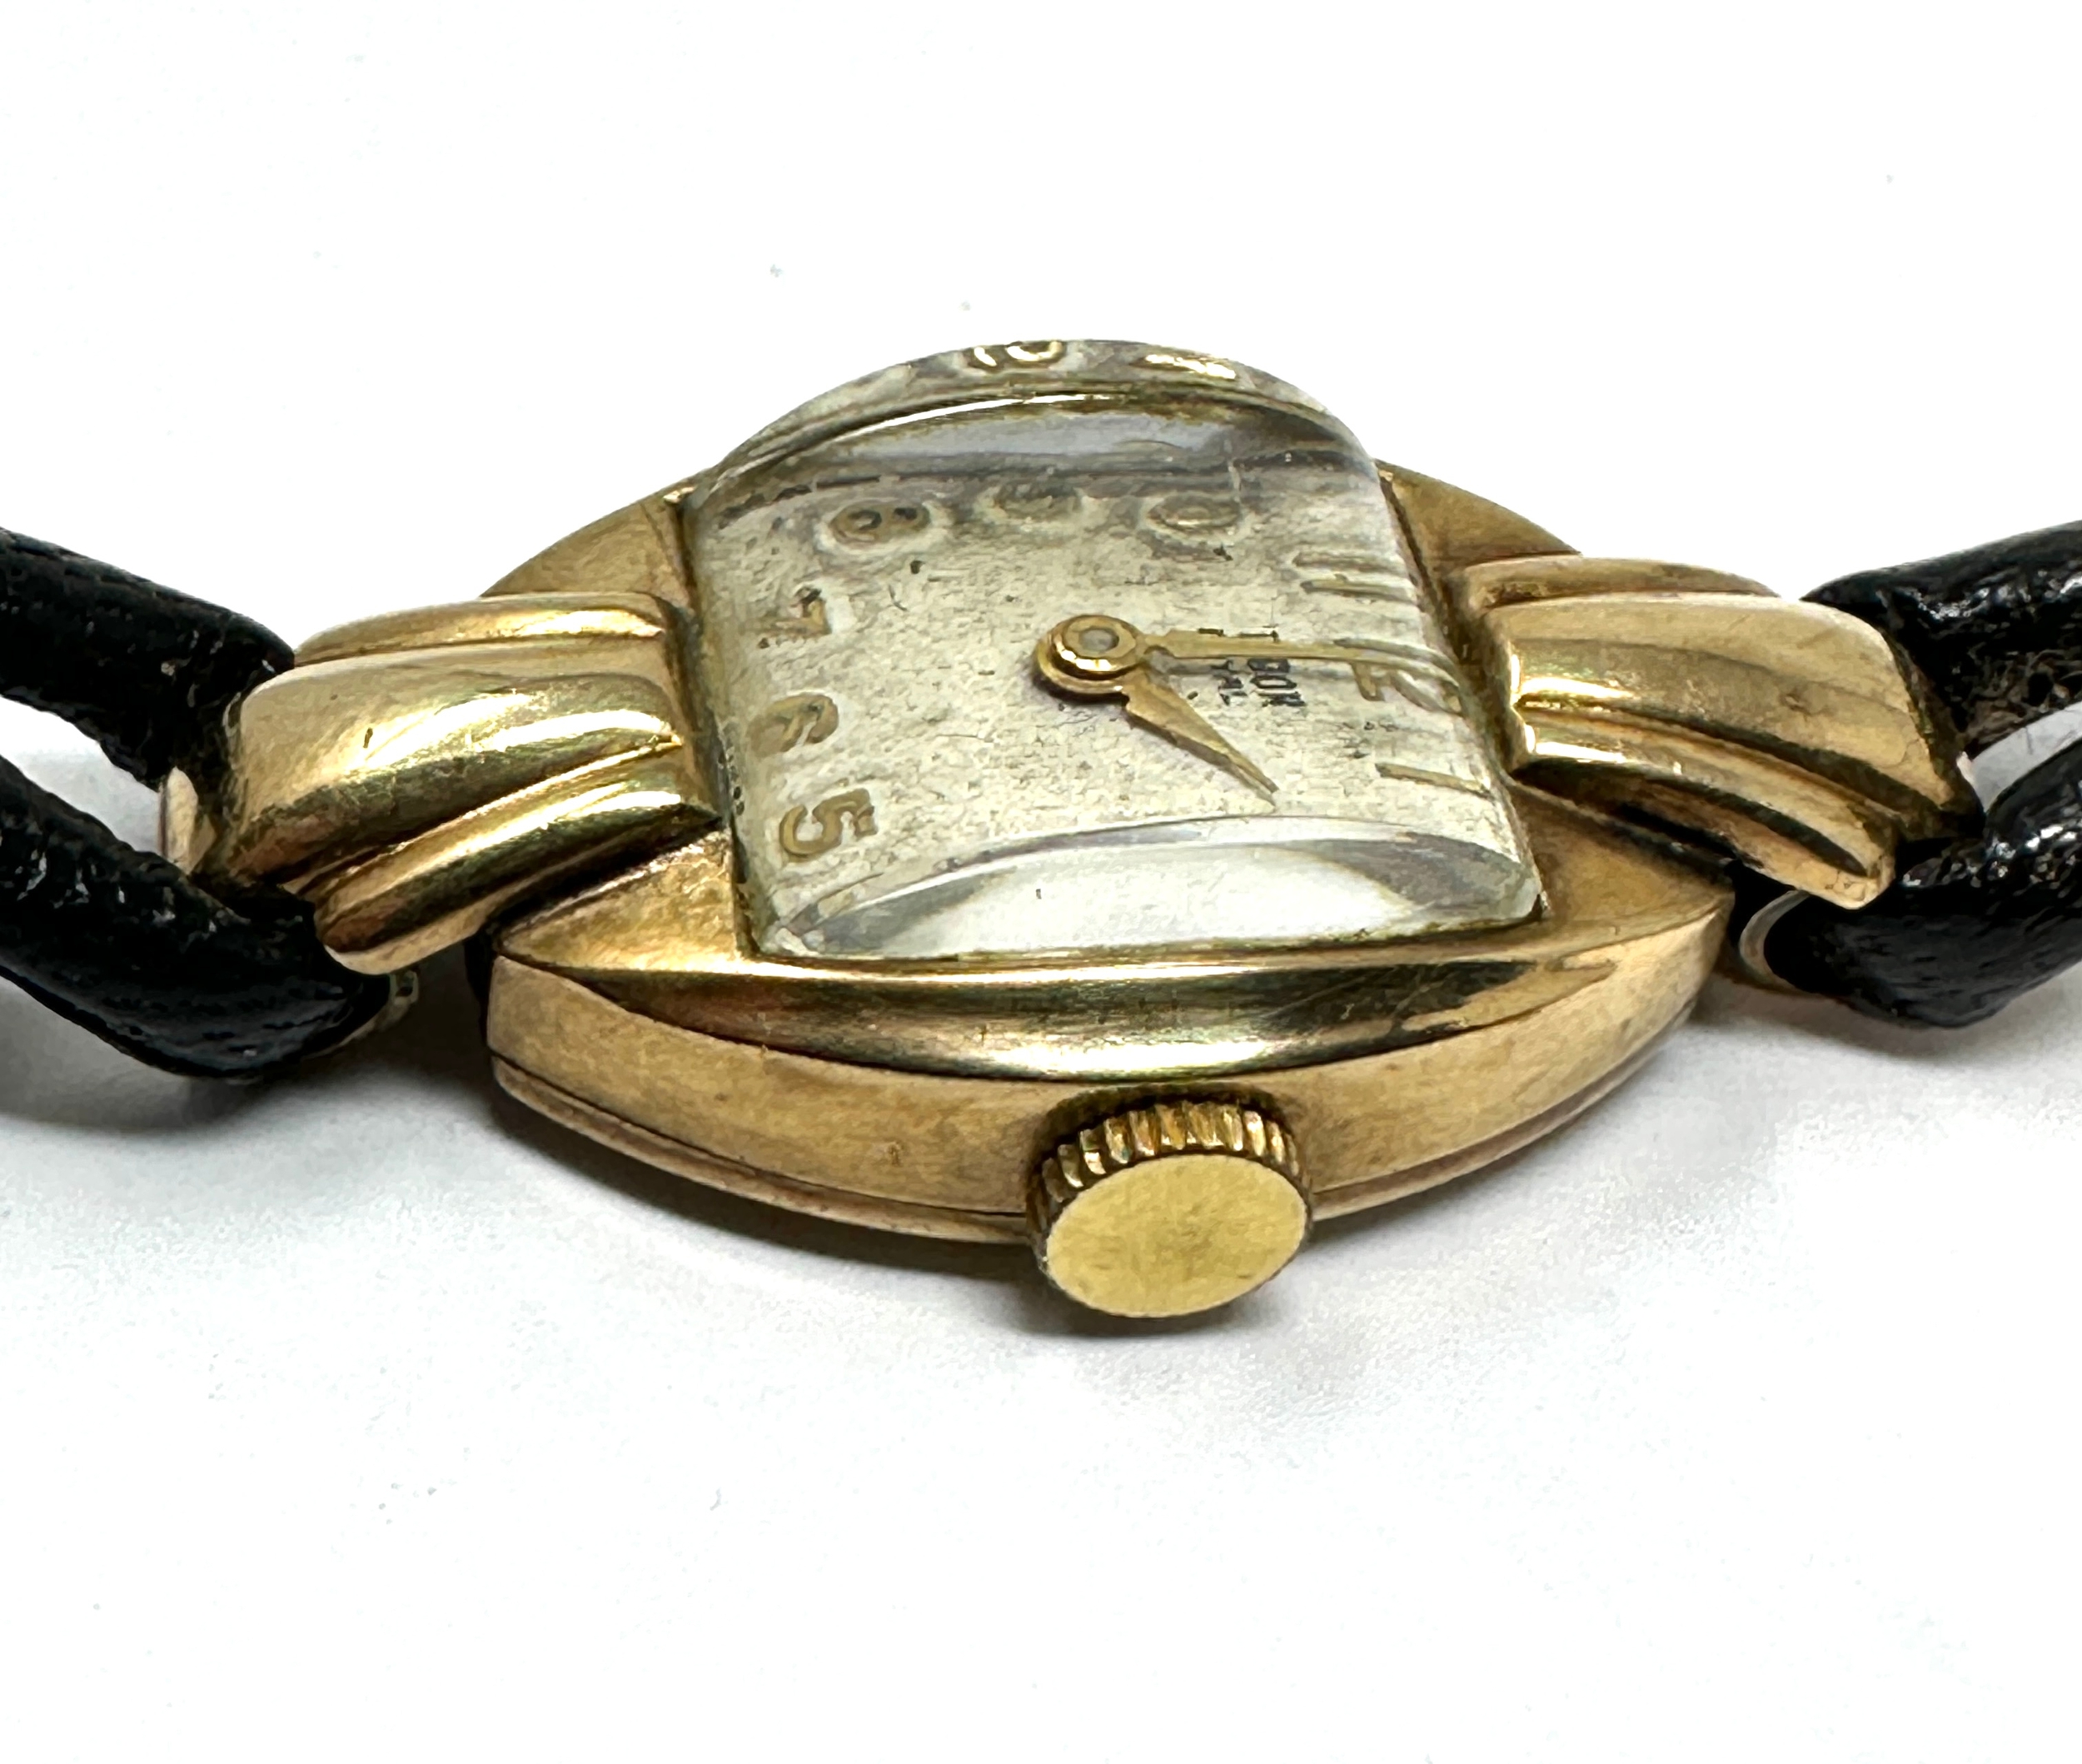 Vintage 9ct gold ladies rolex tudor wristwatch with black leather strap the watch winds and ticks - Image 2 of 4